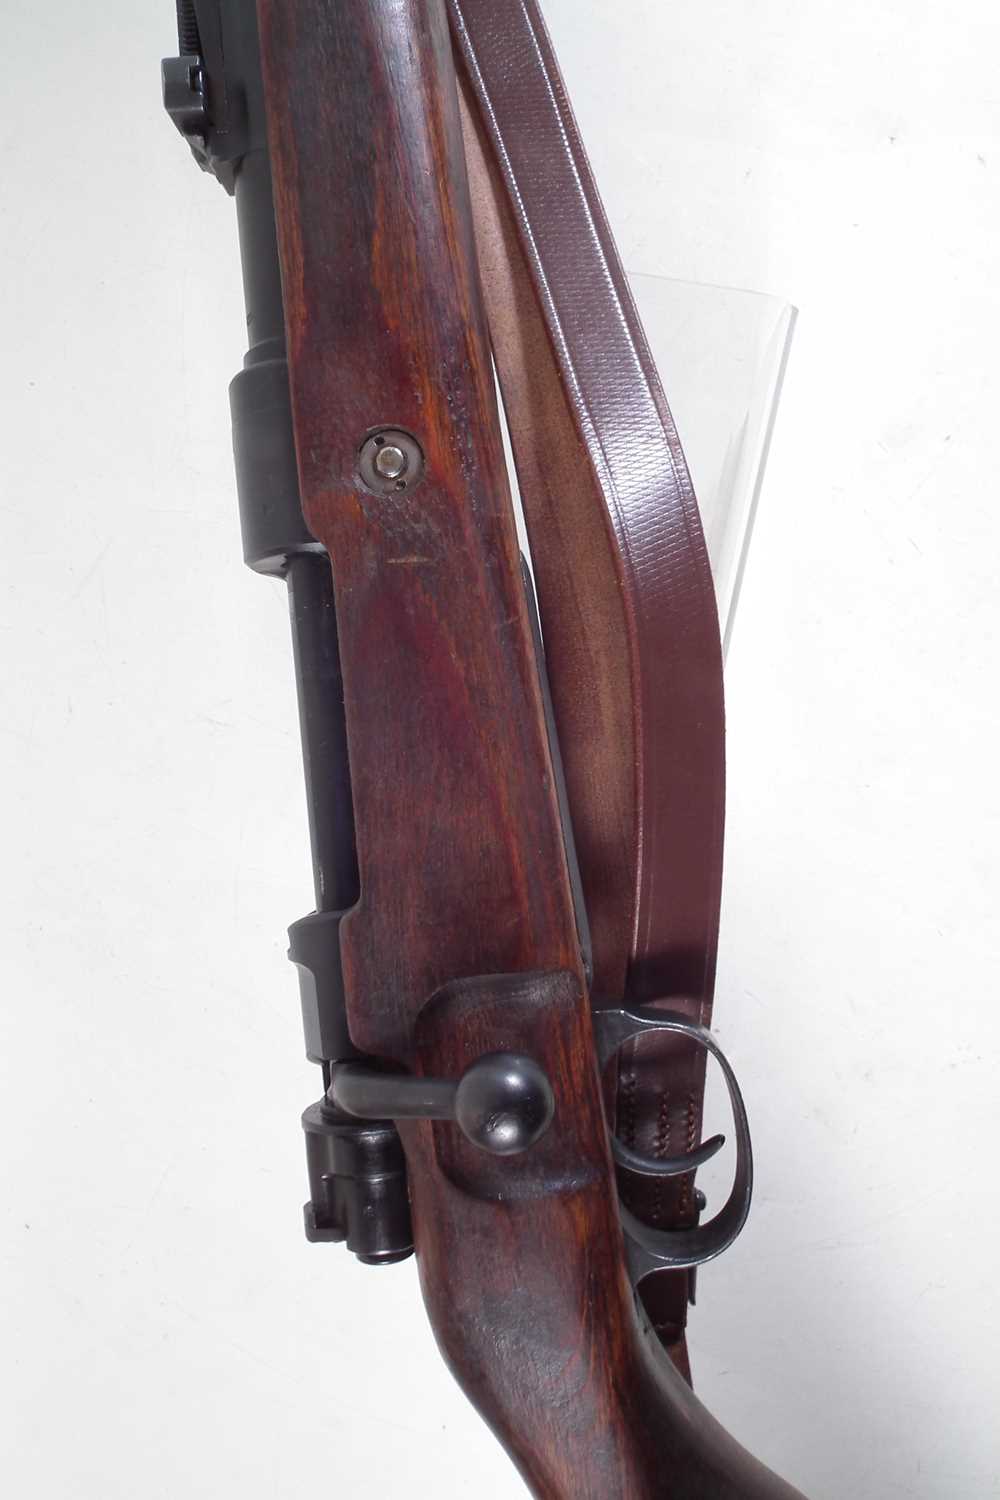 Deactivated Mauser K98 7.92 bolt action rifle - Image 4 of 10